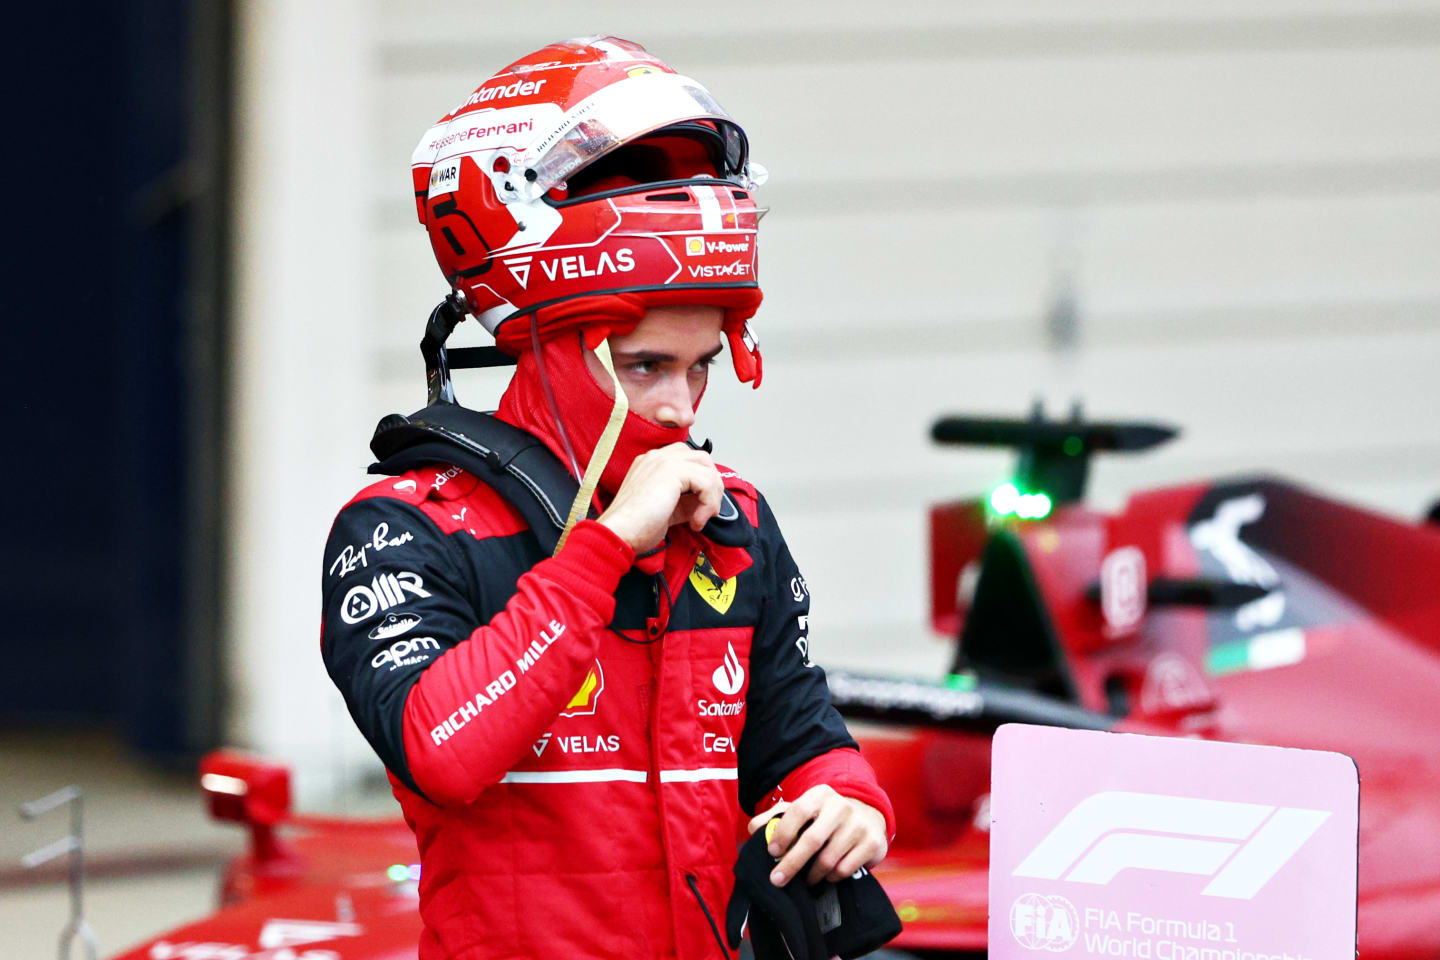 SUZUKA, JAPAN - OCTOBER 09: Third placed Charles Leclerc of Monaco and Ferrari looks on in parc ferme during the F1 Grand Prix of Japan at Suzuka International Racing Course on October 09, 2022 in Suzuka, Japan. (Photo by Clive Rose/Getty Images)